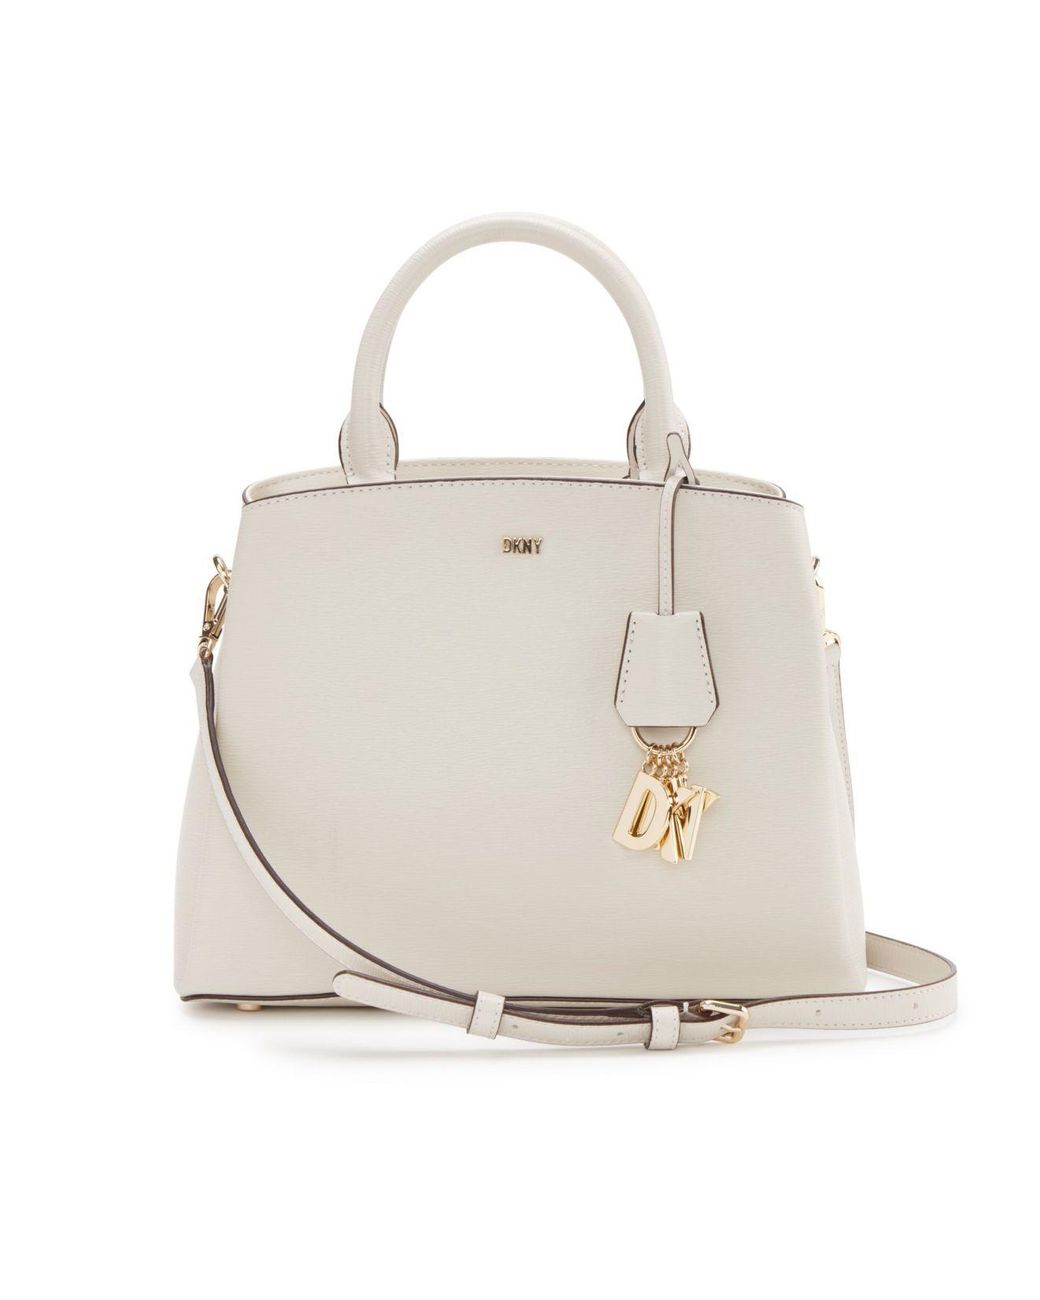 DKNY Paige Medium Satchel With Convertible Strap in White | Lyst